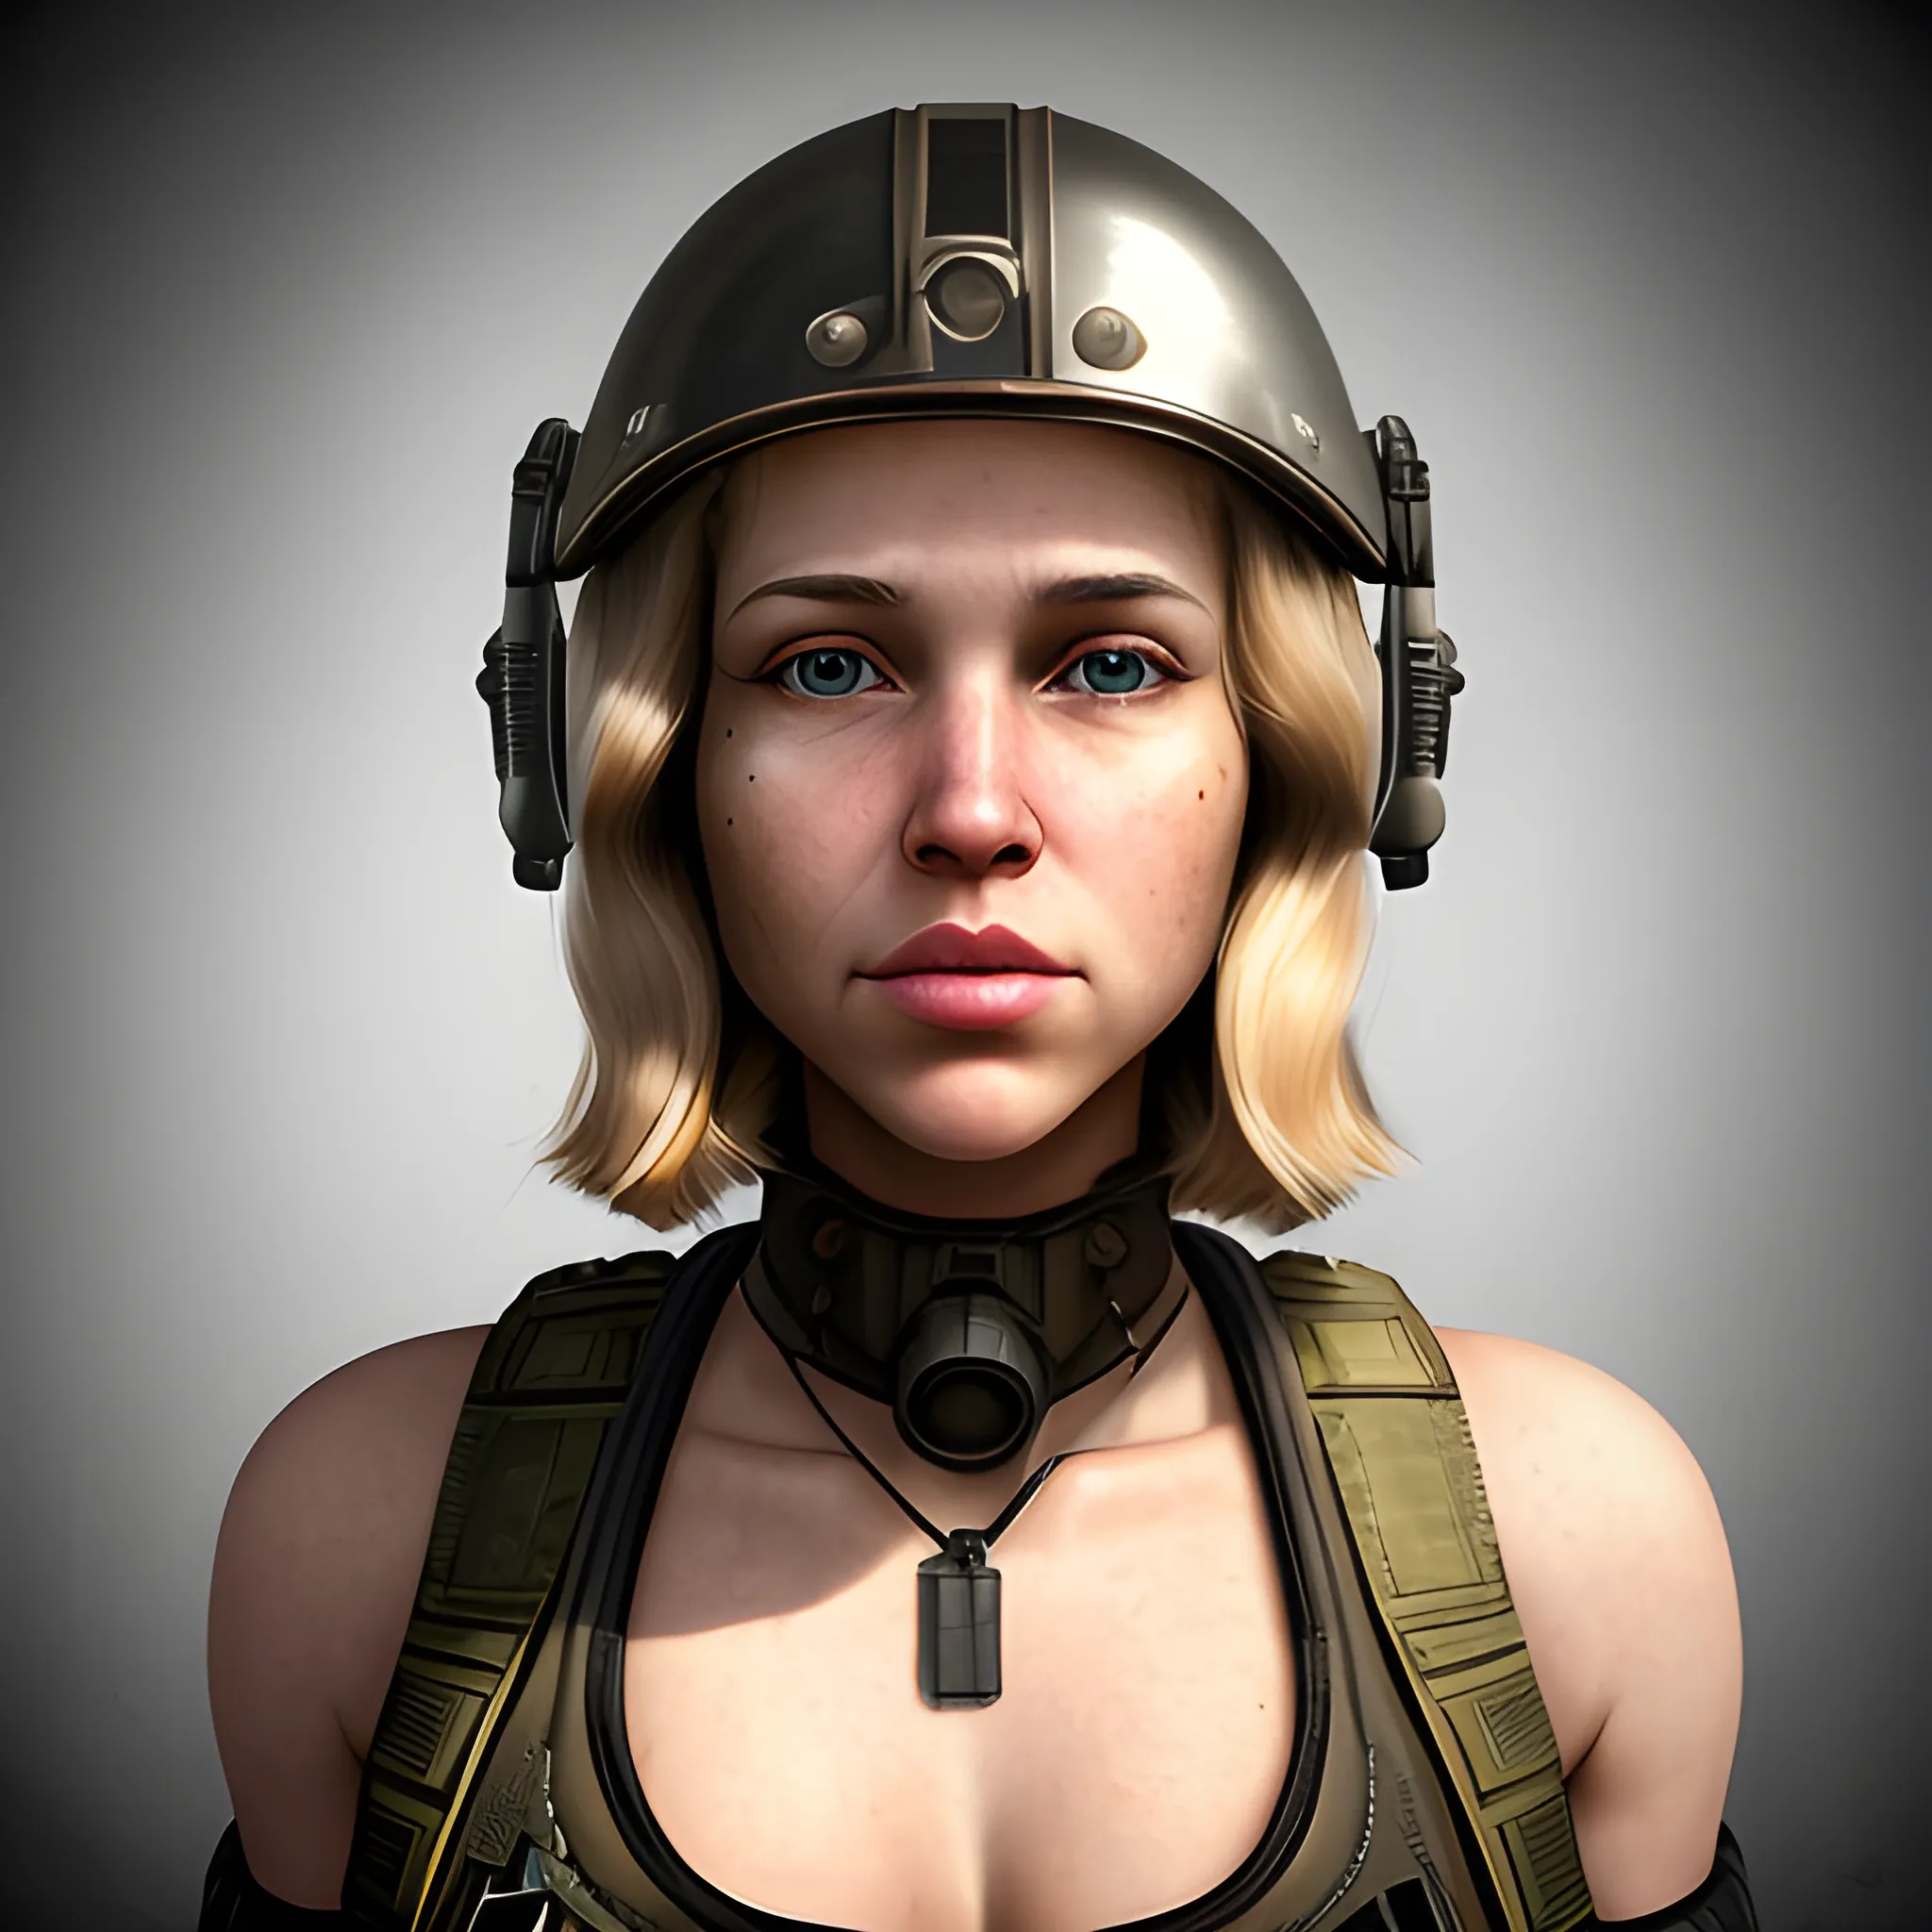 In the style of fallout 1, (masterpiece), (portrait photography), (portrait of a Caucasian female), no makeup, flat chested, white sports bra, dogtags, long hair, blond hair, brown eyes, full lips, round face, round nose, plump cheeks, black Bulletproof vest, F-35 Jet Fighter Helmet